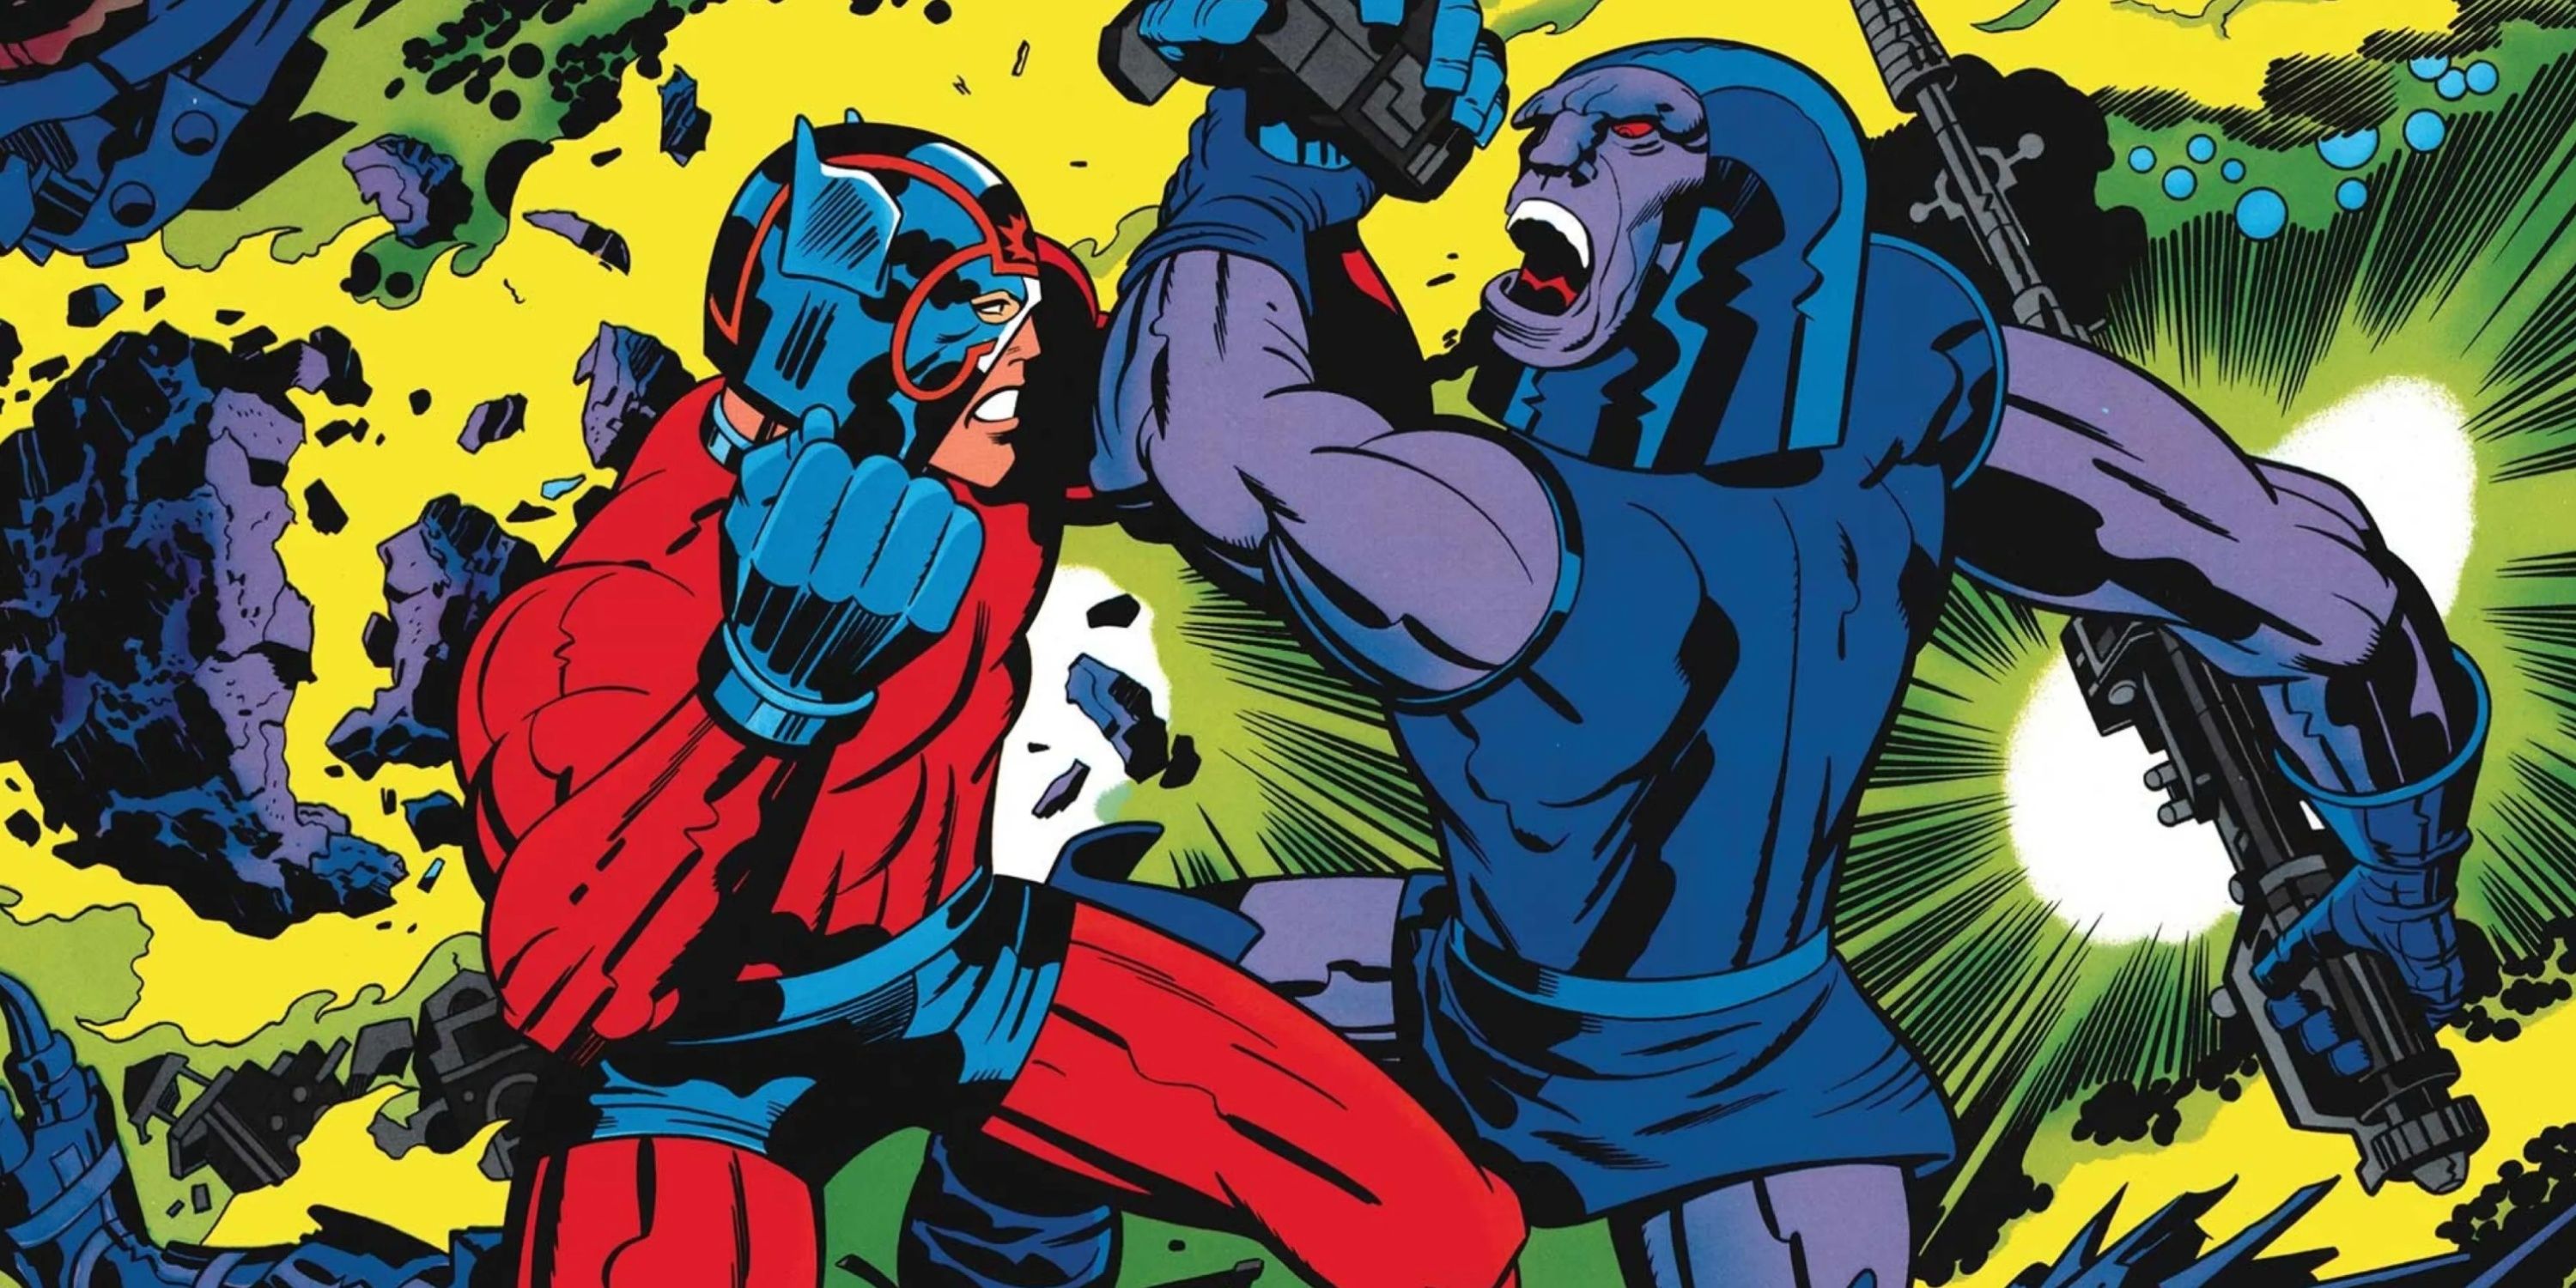 Orion and Darkseid battle amidst an explosion